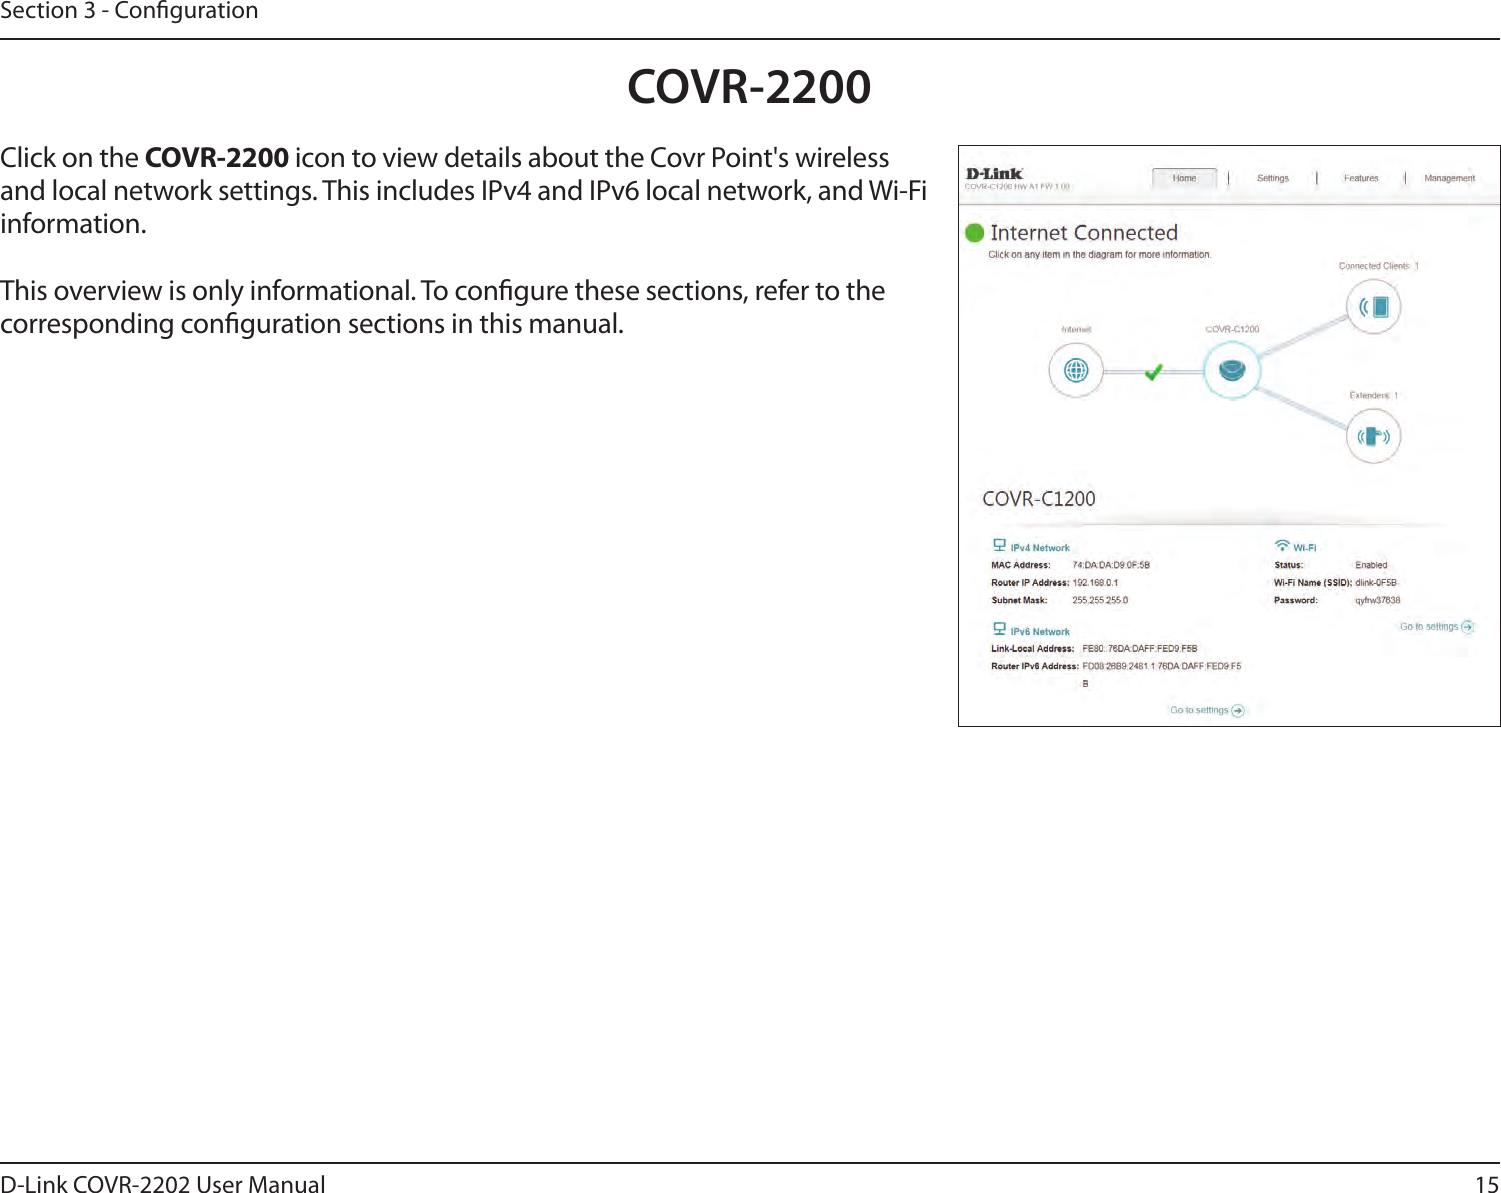 15D-Link COVR-2202 User ManualSection 3 - CongurationCOVR-2200Click on the COVR-2200 icon to view details about the Covr Point&apos;s wireless and local network settings. This includes IPv4 and IPv6 local network, and Wi-Fi information.This overview is only informational. To congure these sections, refer to the corresponding conguration sections in this manual.